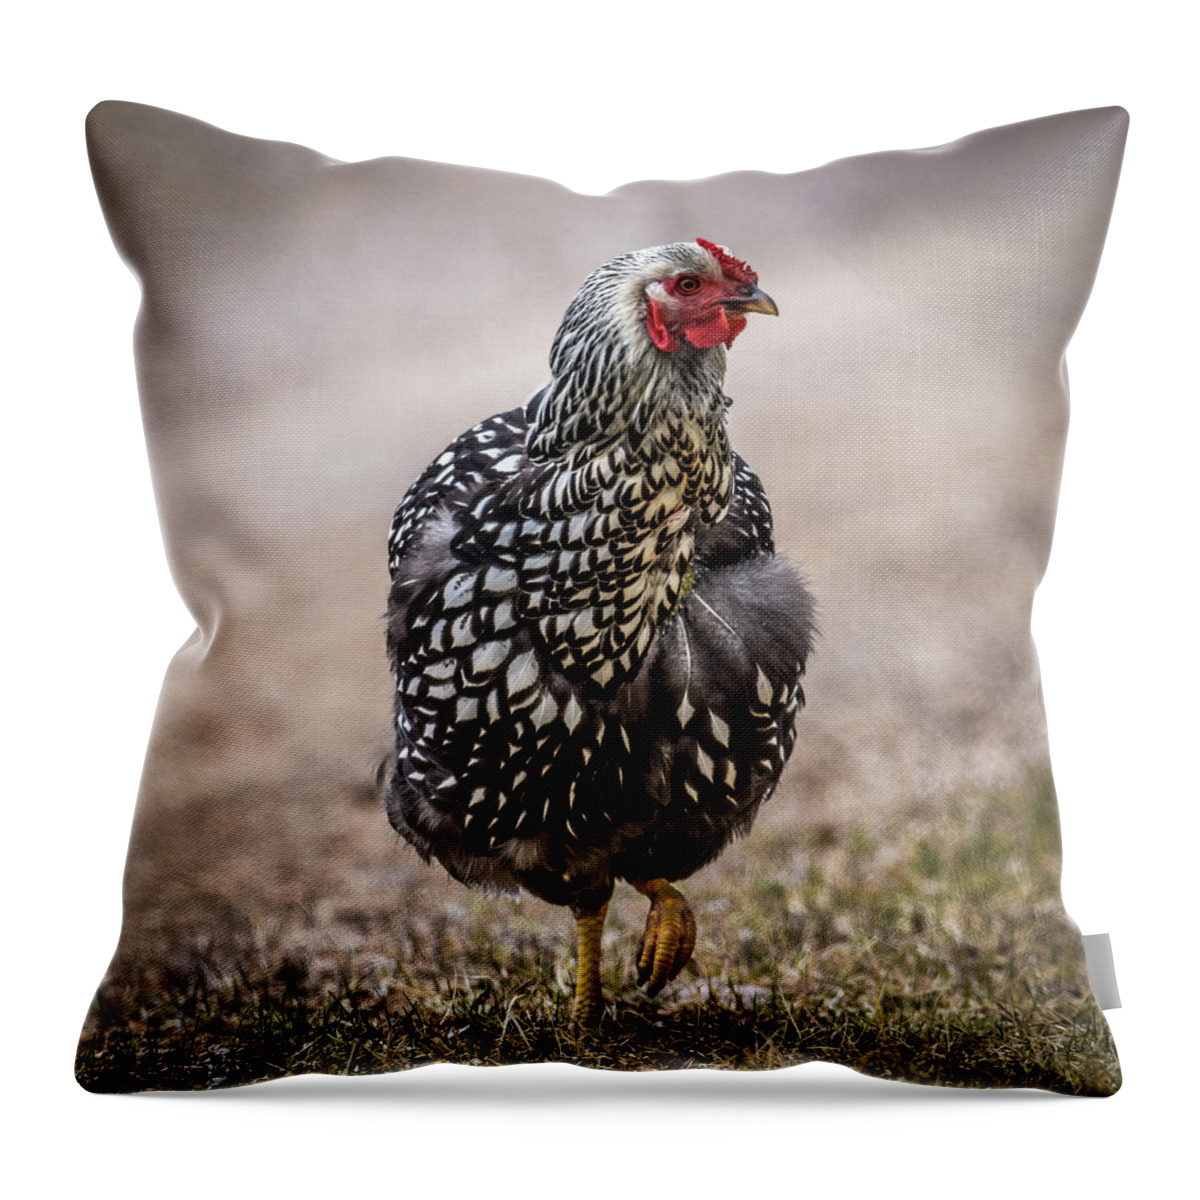 Hen And Chicks Throw Pillow featuring the photograph Black and White Chicken by Paul Freidlund